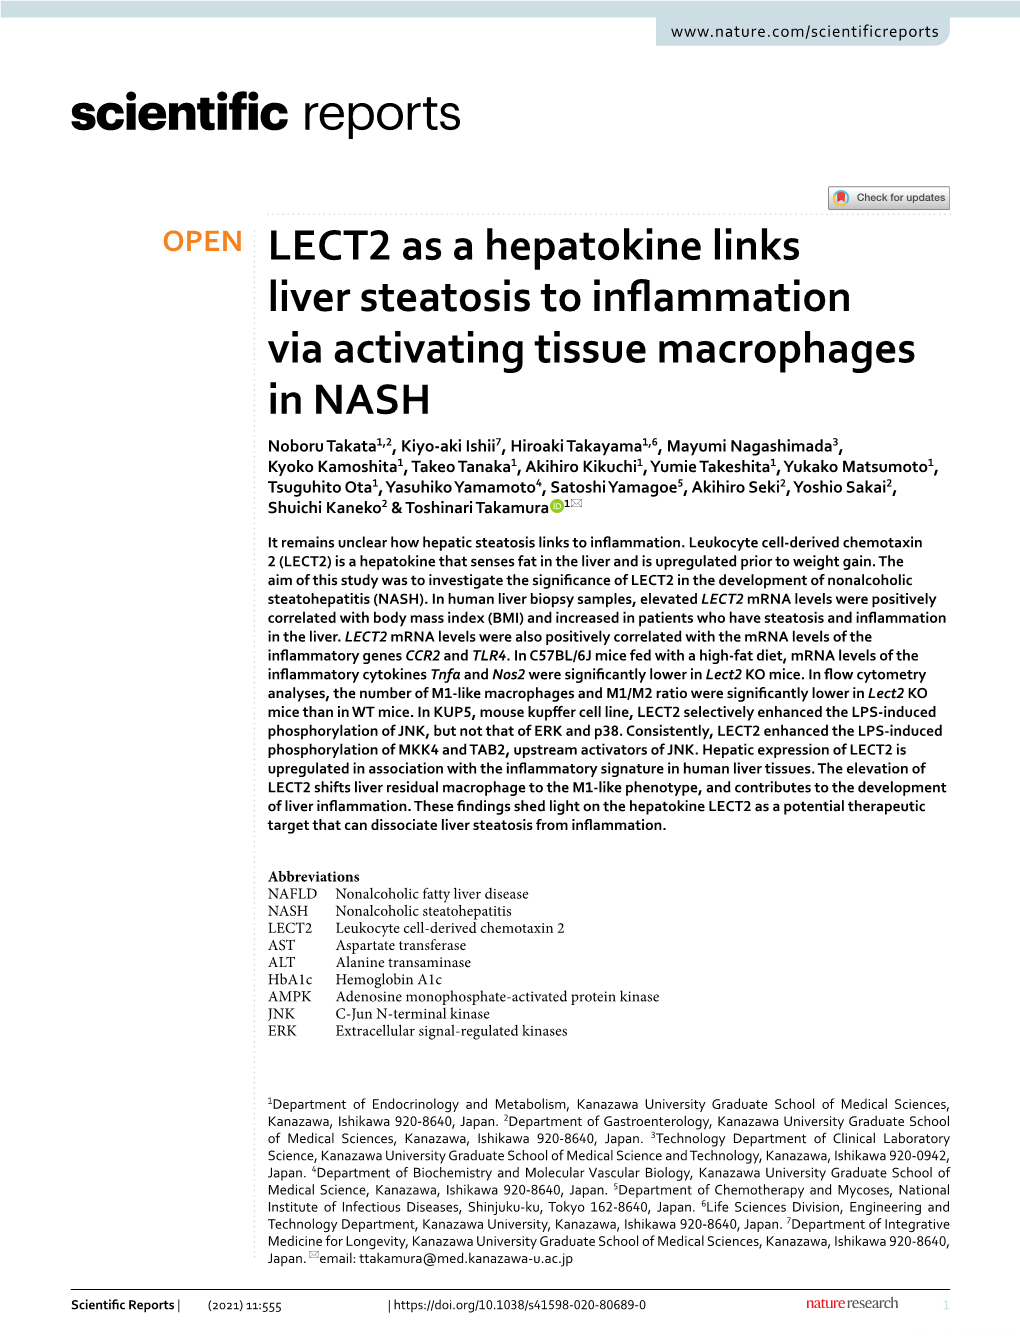 LECT2 As a Hepatokine Links Liver Steatosis to Inflammation Via